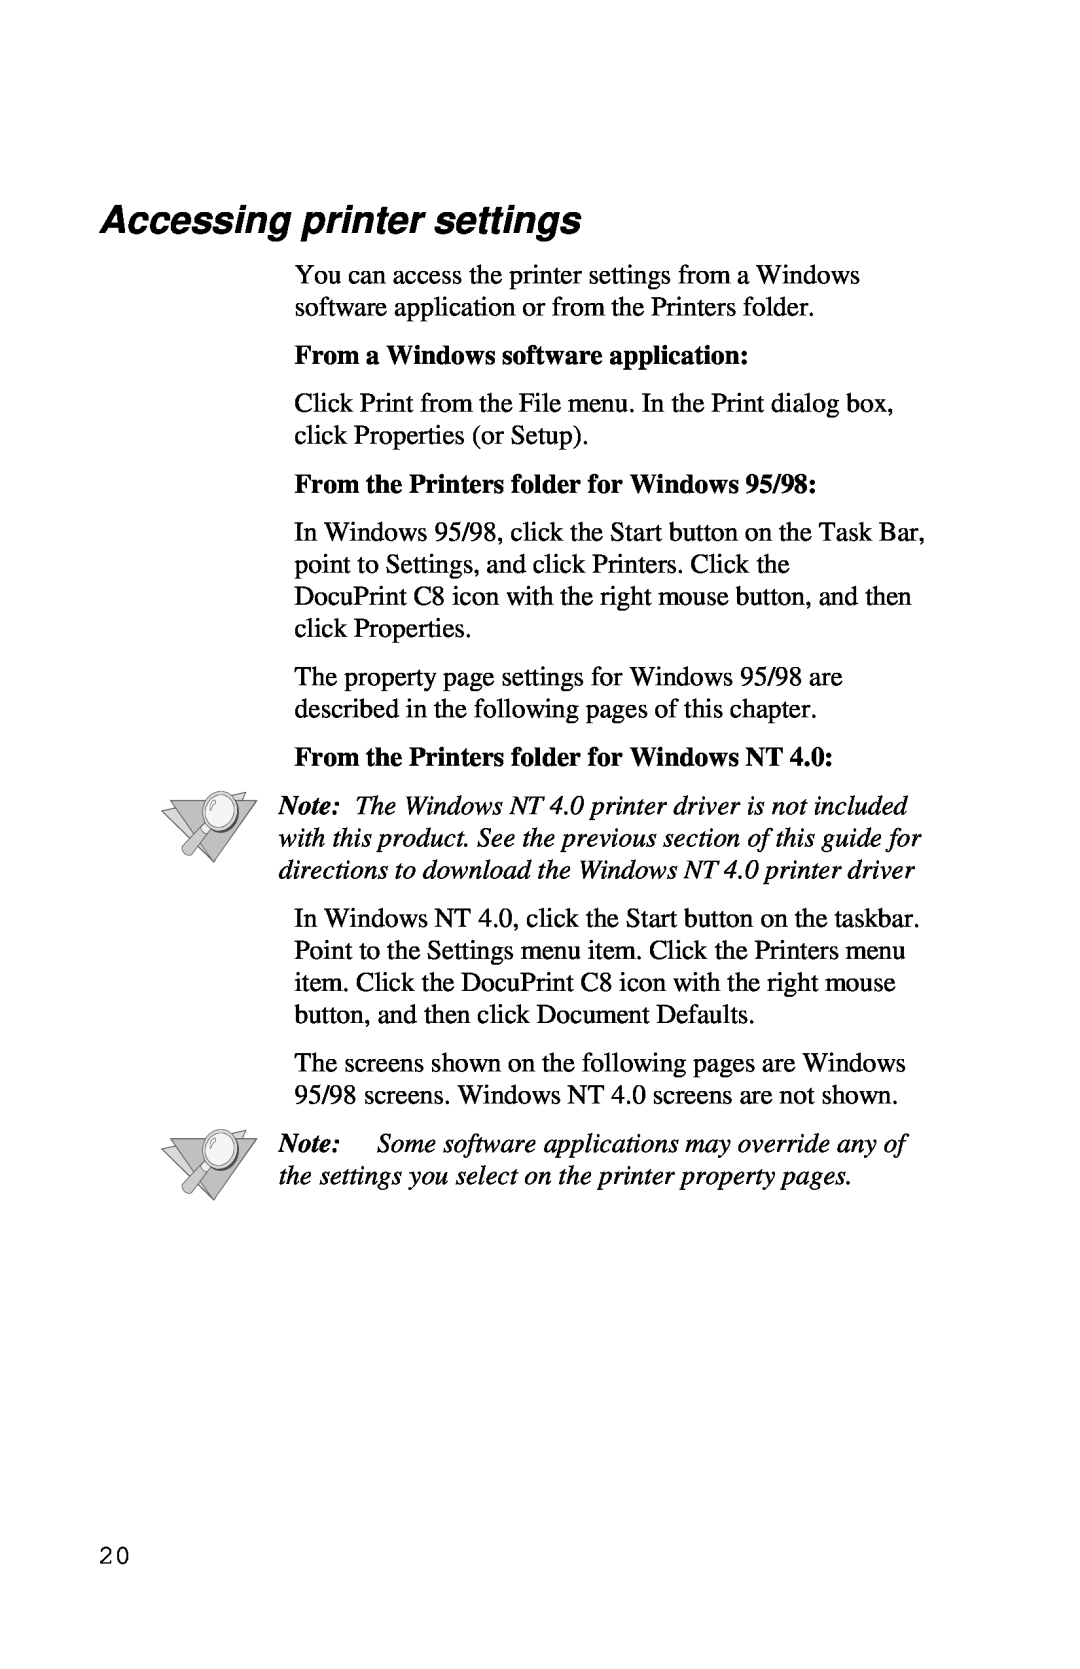 Xerox Inkjet Printer manual Accessing printer settings, From a Windows software application 